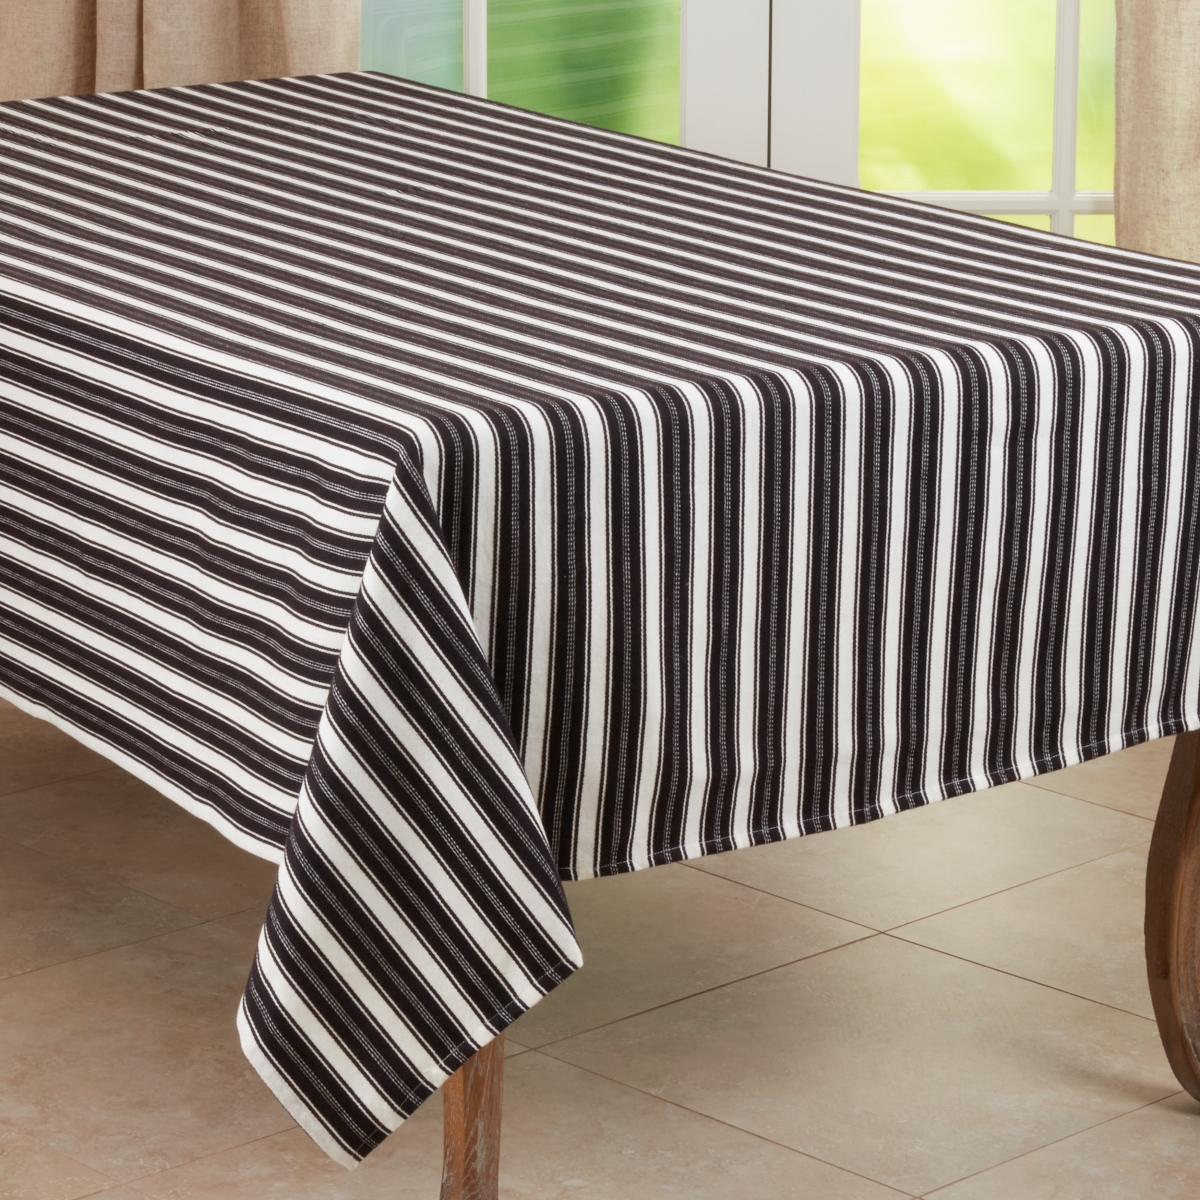 Picture of SARO 306.BW65120B Cotton Tablecloth with Striped Design